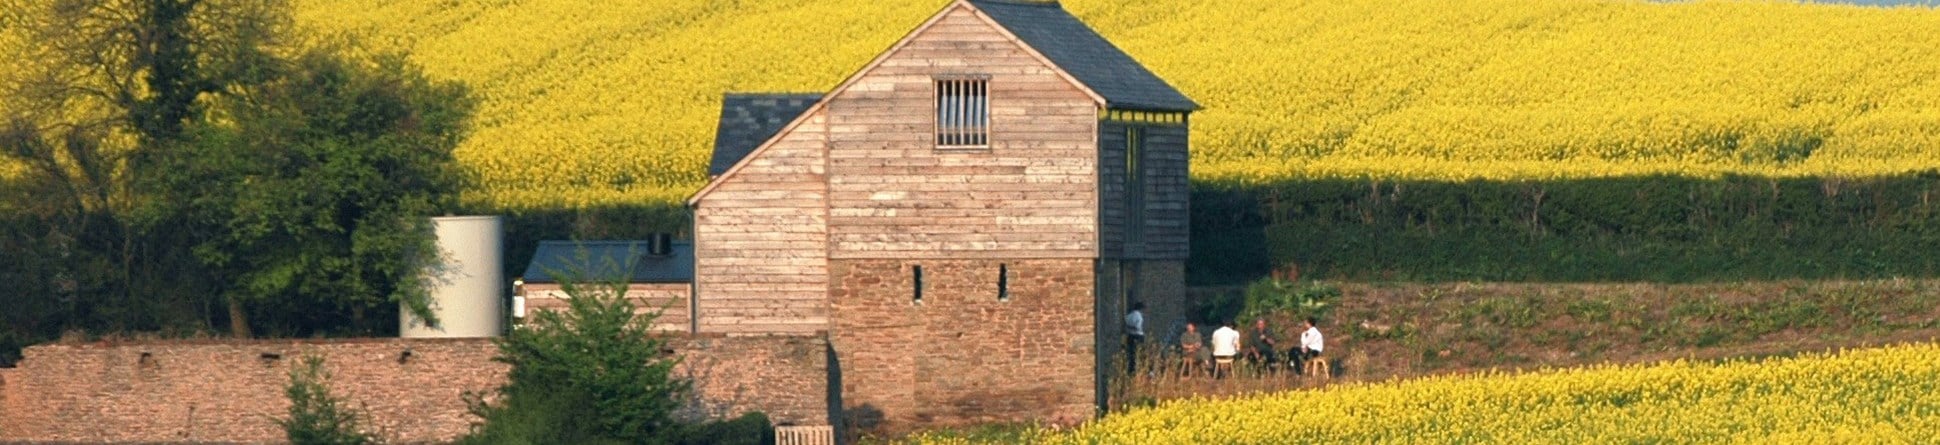 A renovated barn surrounded by golden fields of flowering rape crops